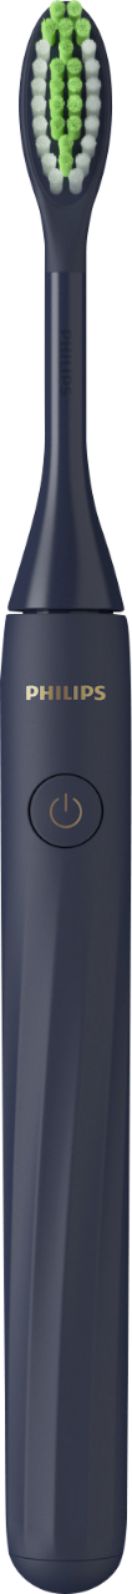 Left View: Philips Sonicare - Philips One by Sonicare Battery Toothbrush - Midnight Navy Blue